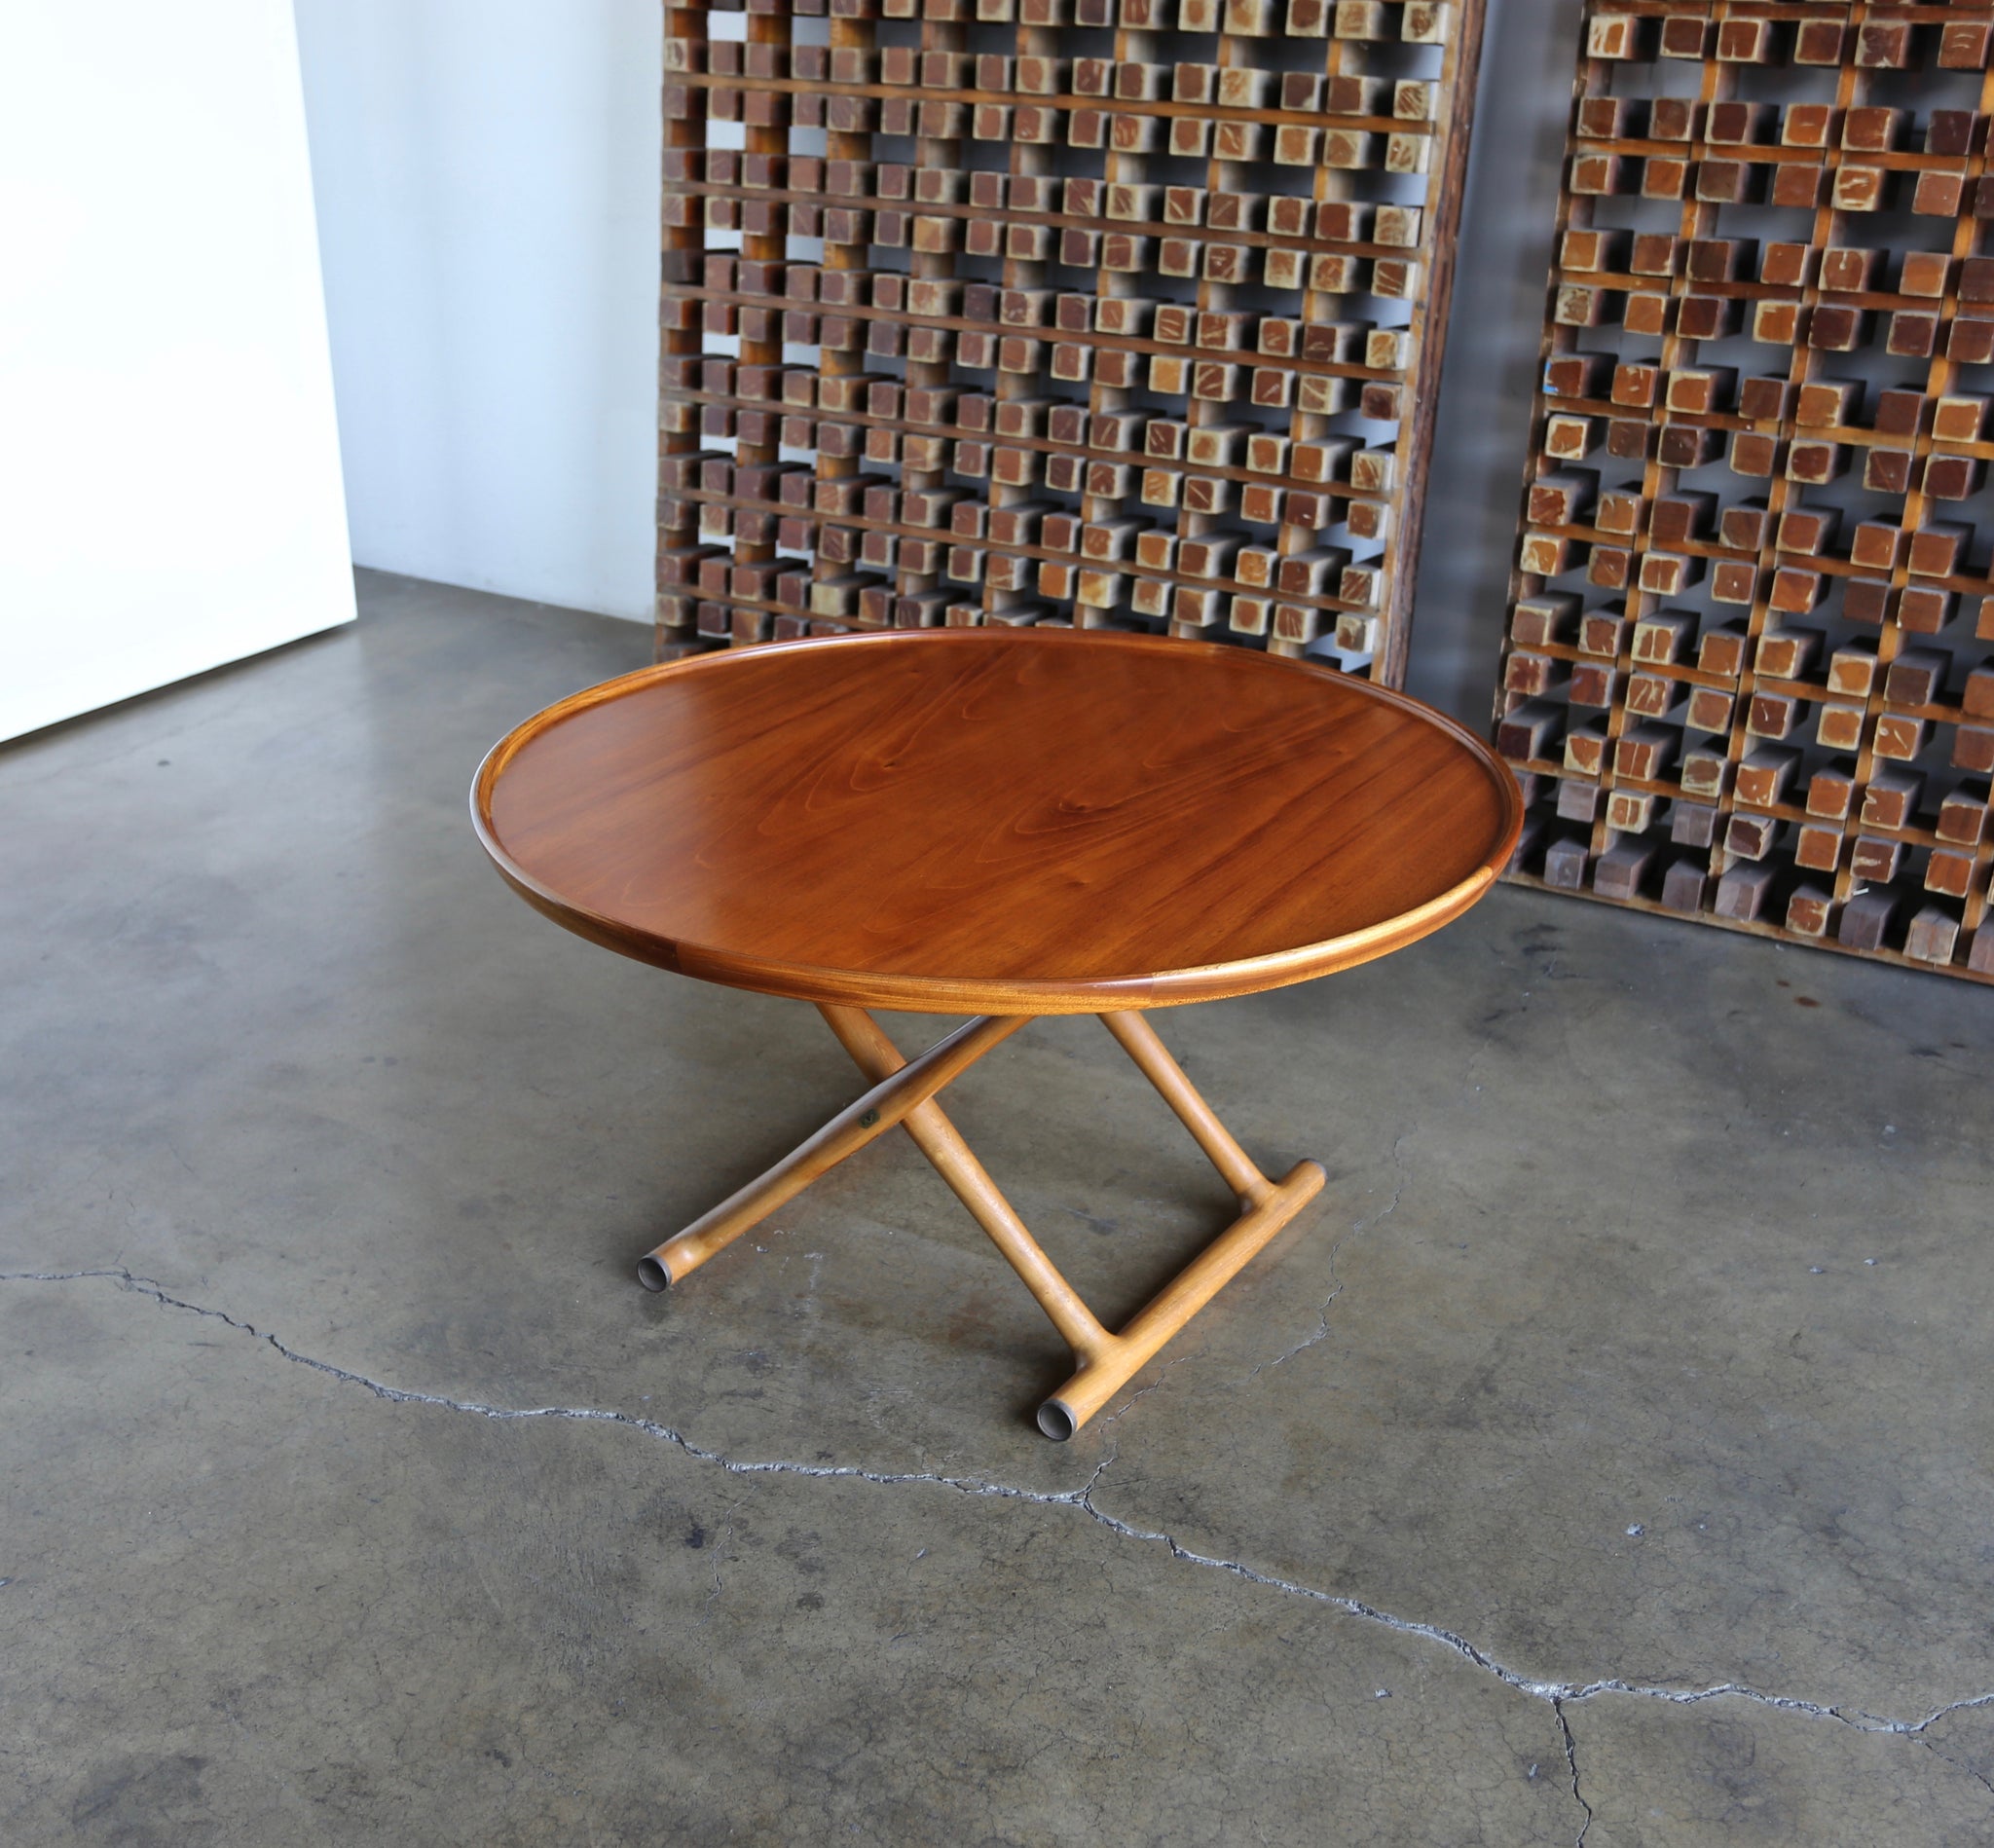 = SOLD = Large Egyptian Table by Mogens Lassen for A.J. Iversen circa 1955